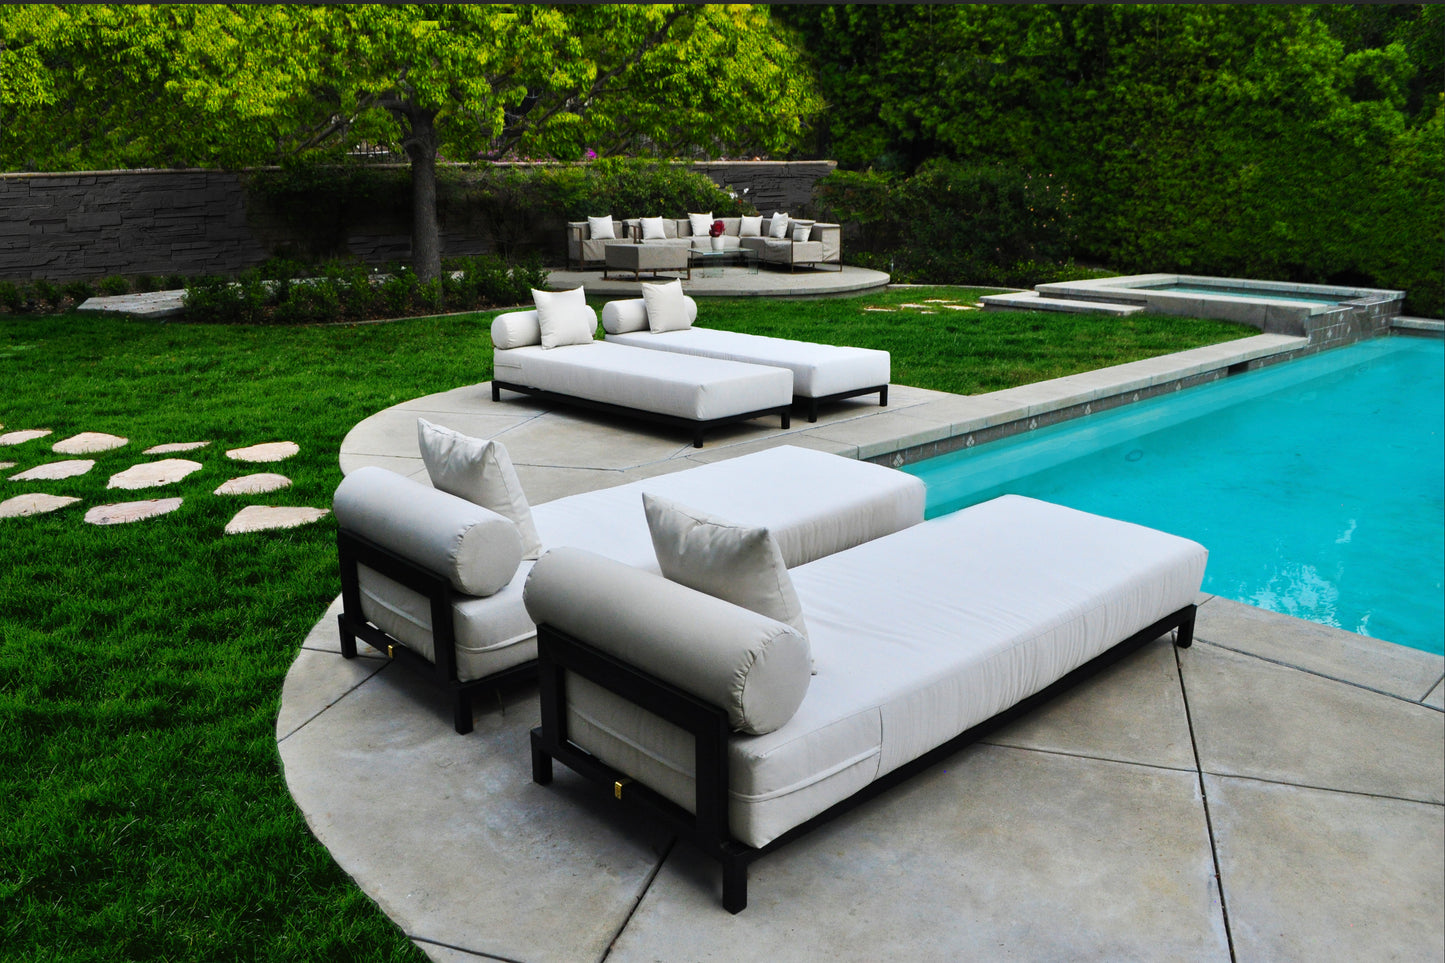 Volantes Outdoor White Chaise Loungers (Set of 3)